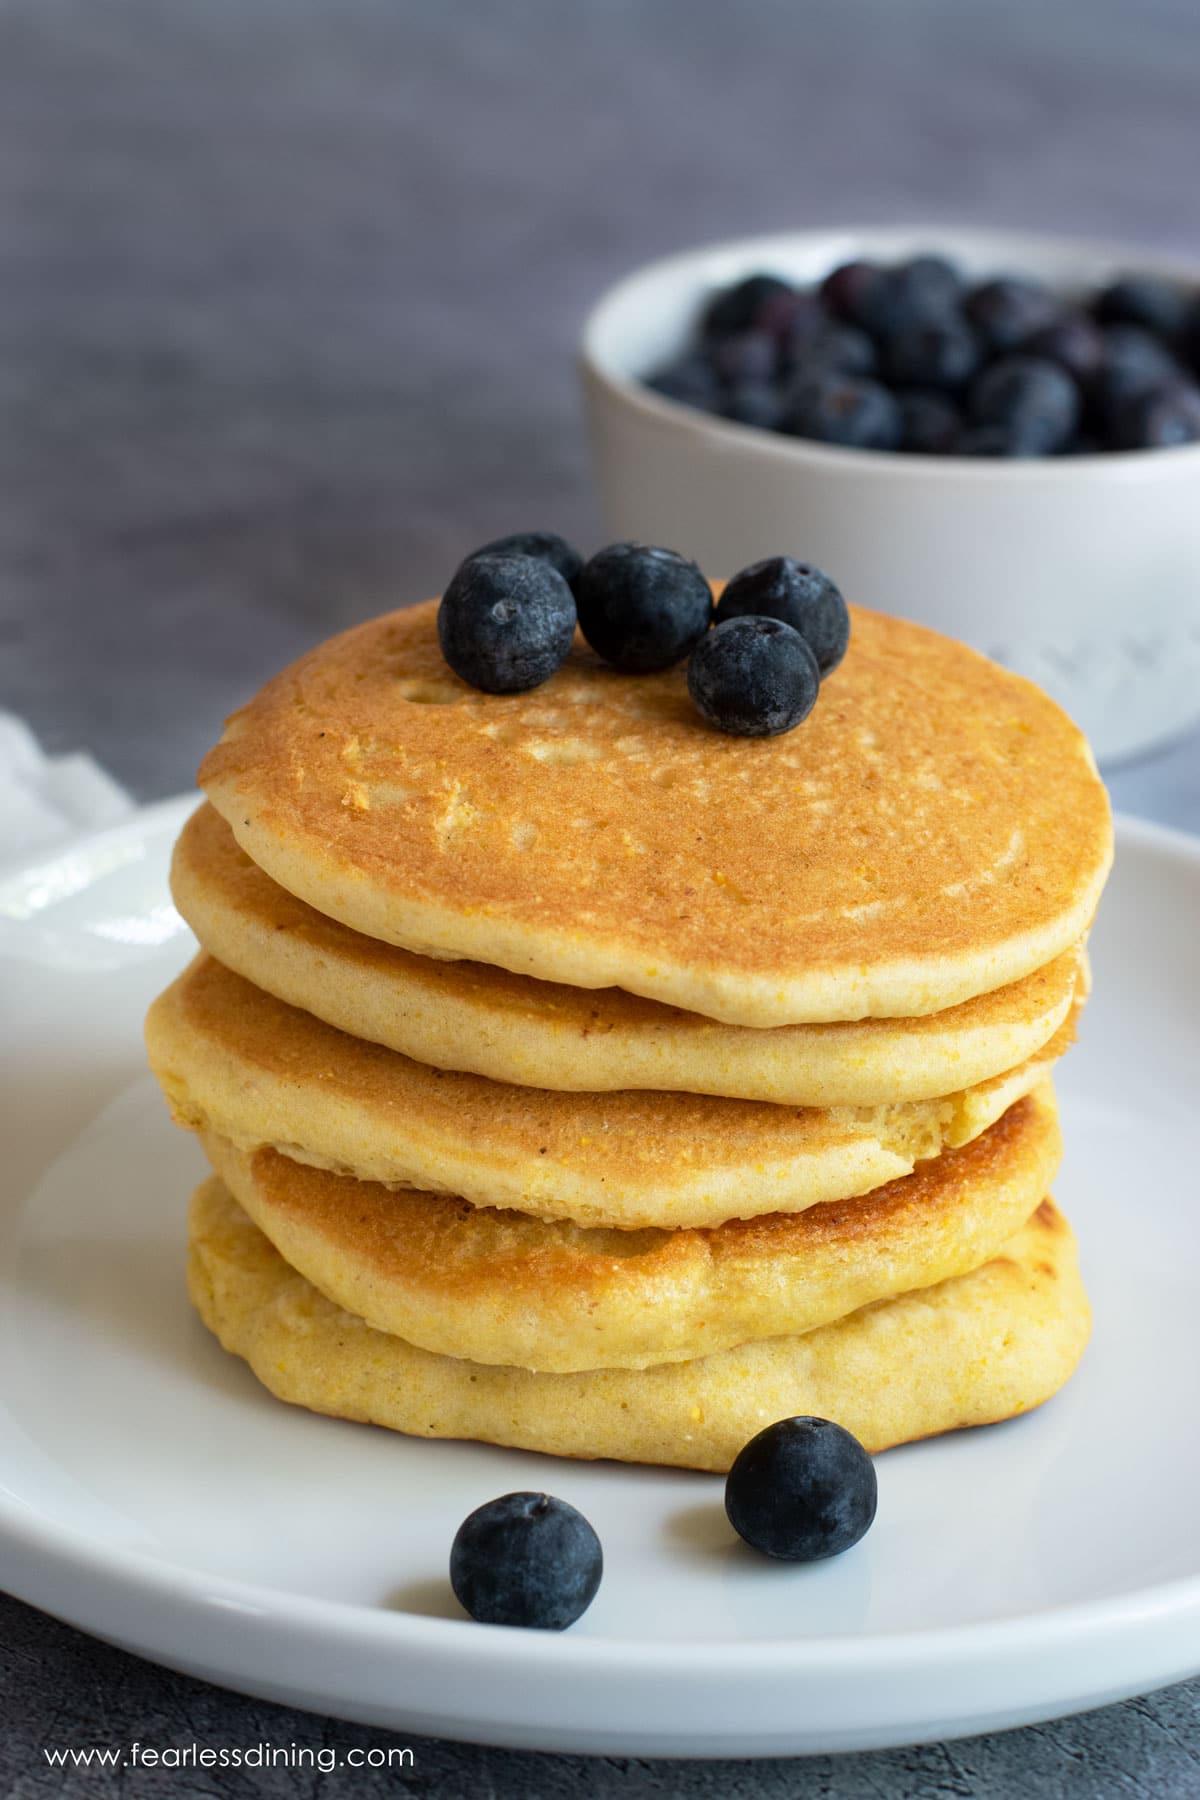 A stack of five cornmeal pancakes topped with fresh blueberries.